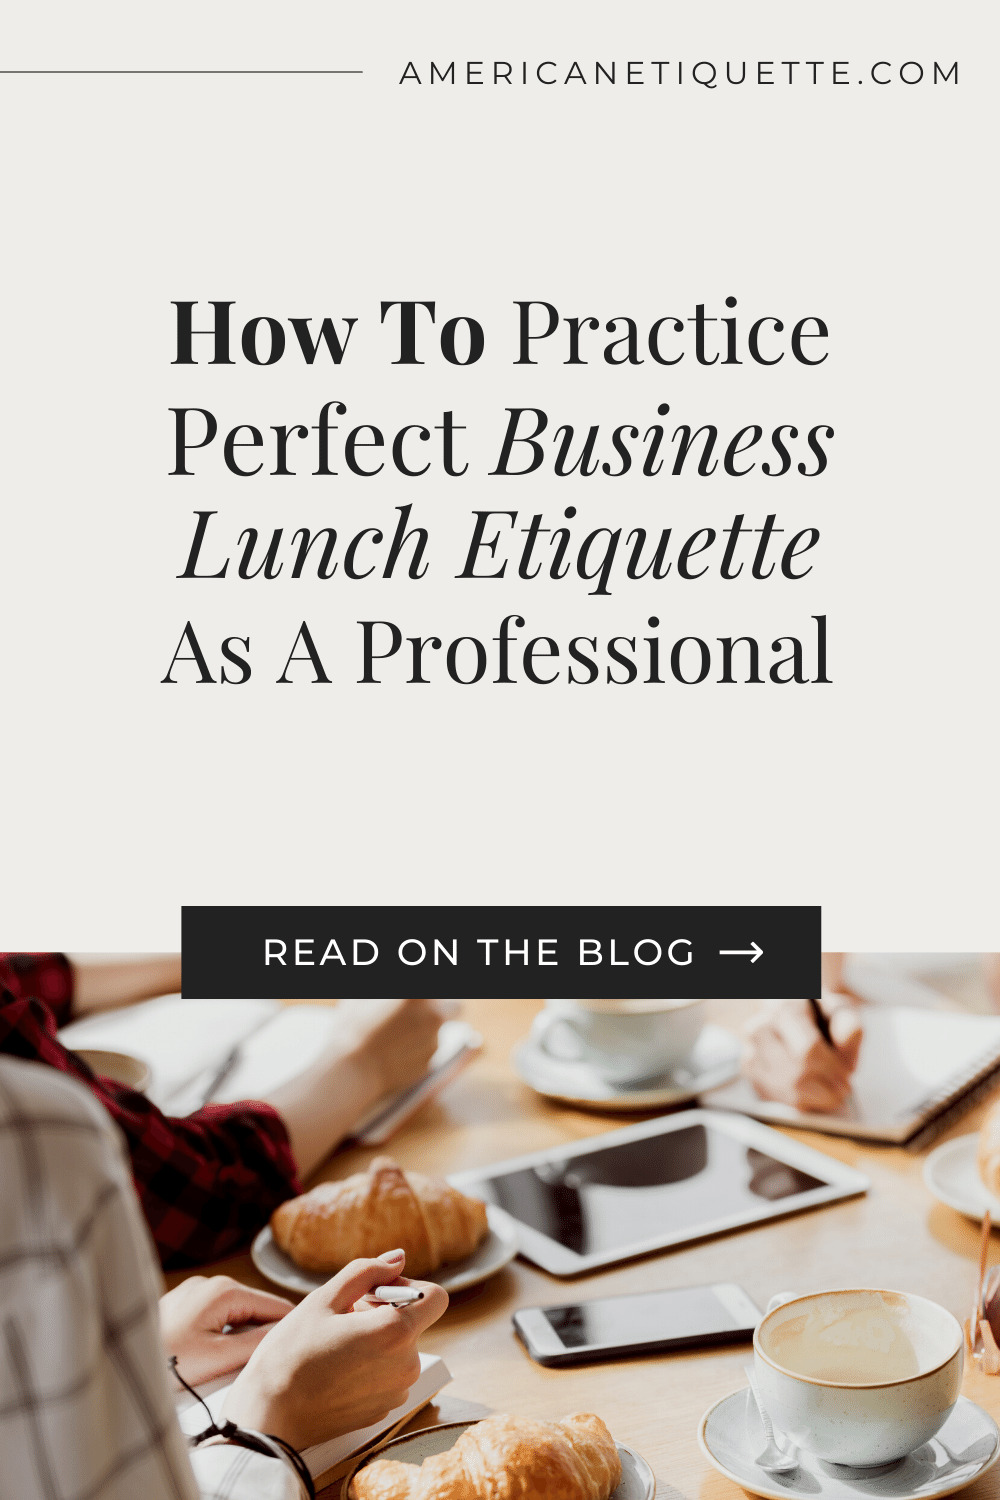 How To Practice Perfect Business Lunch Etiquette As A Professional | American Etiquette